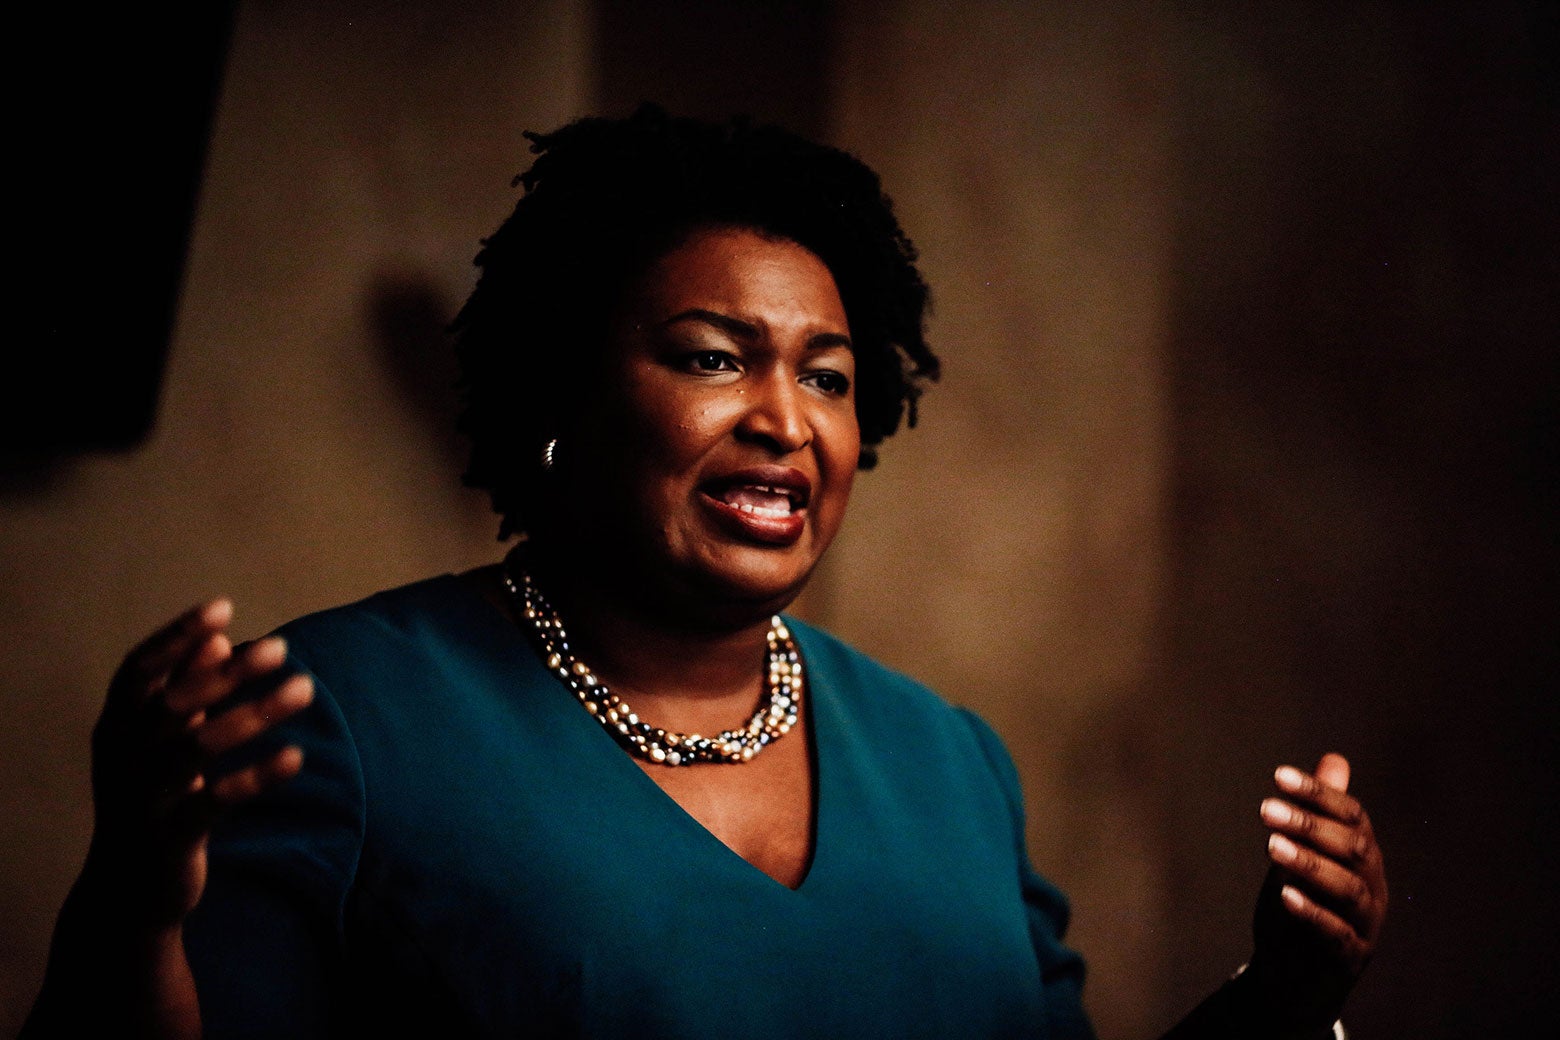 Georgia's Stacey Abrams, a Democrat, would become the first black woman to be elected governor in U.S. history.